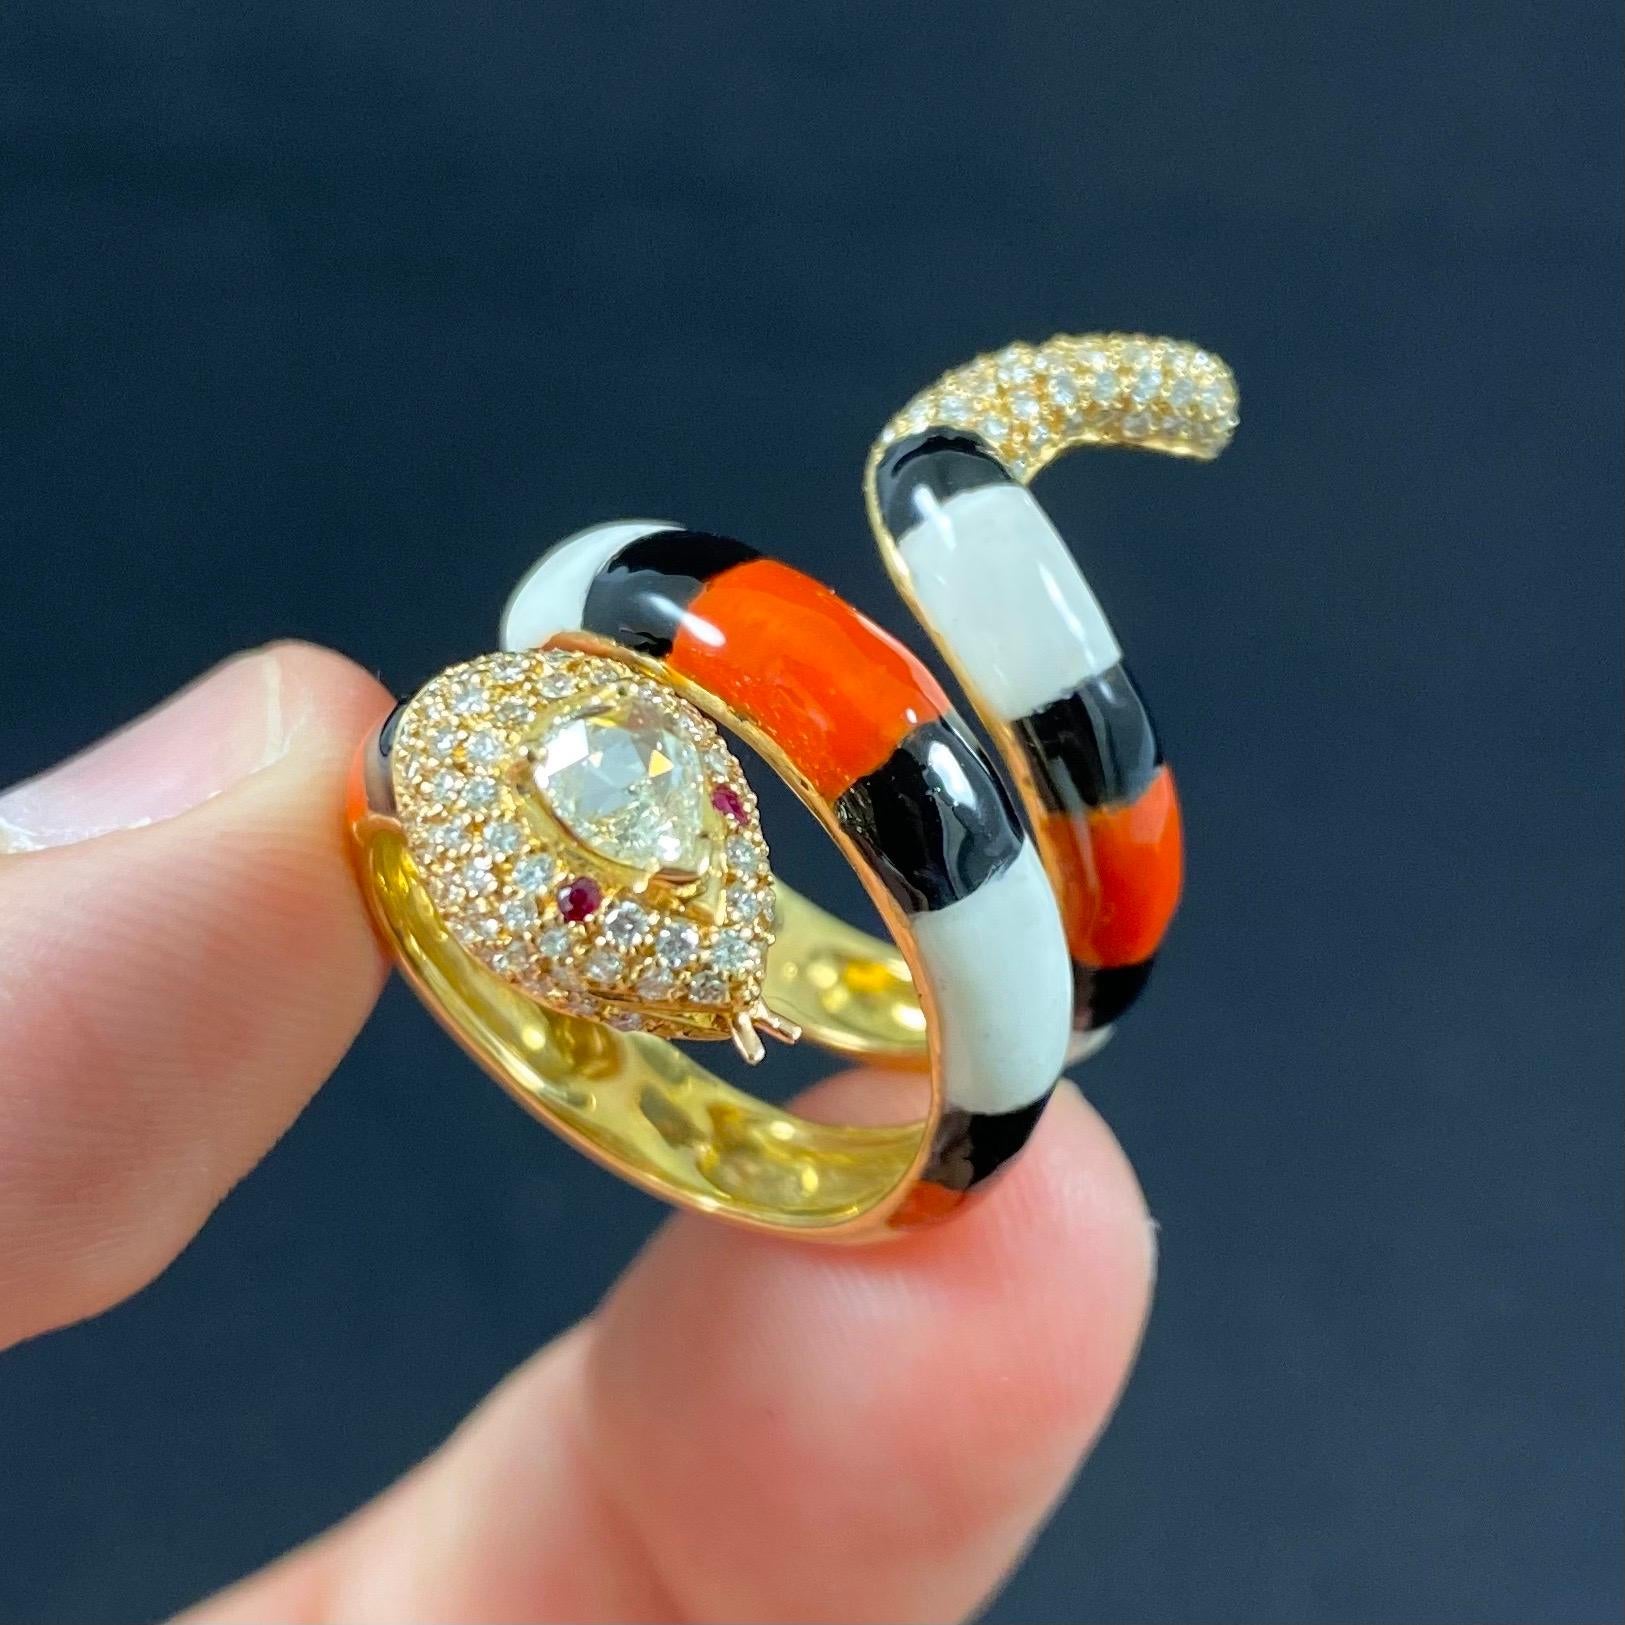 A contemporary diamond and polychrome enamel serpent snake cocktail or dress ring in 19.2 karat yellow gold, Portuguese, 2010s. This openwork ring is modelled as a snake coiling around the finger, the body embellished with orange, black and white